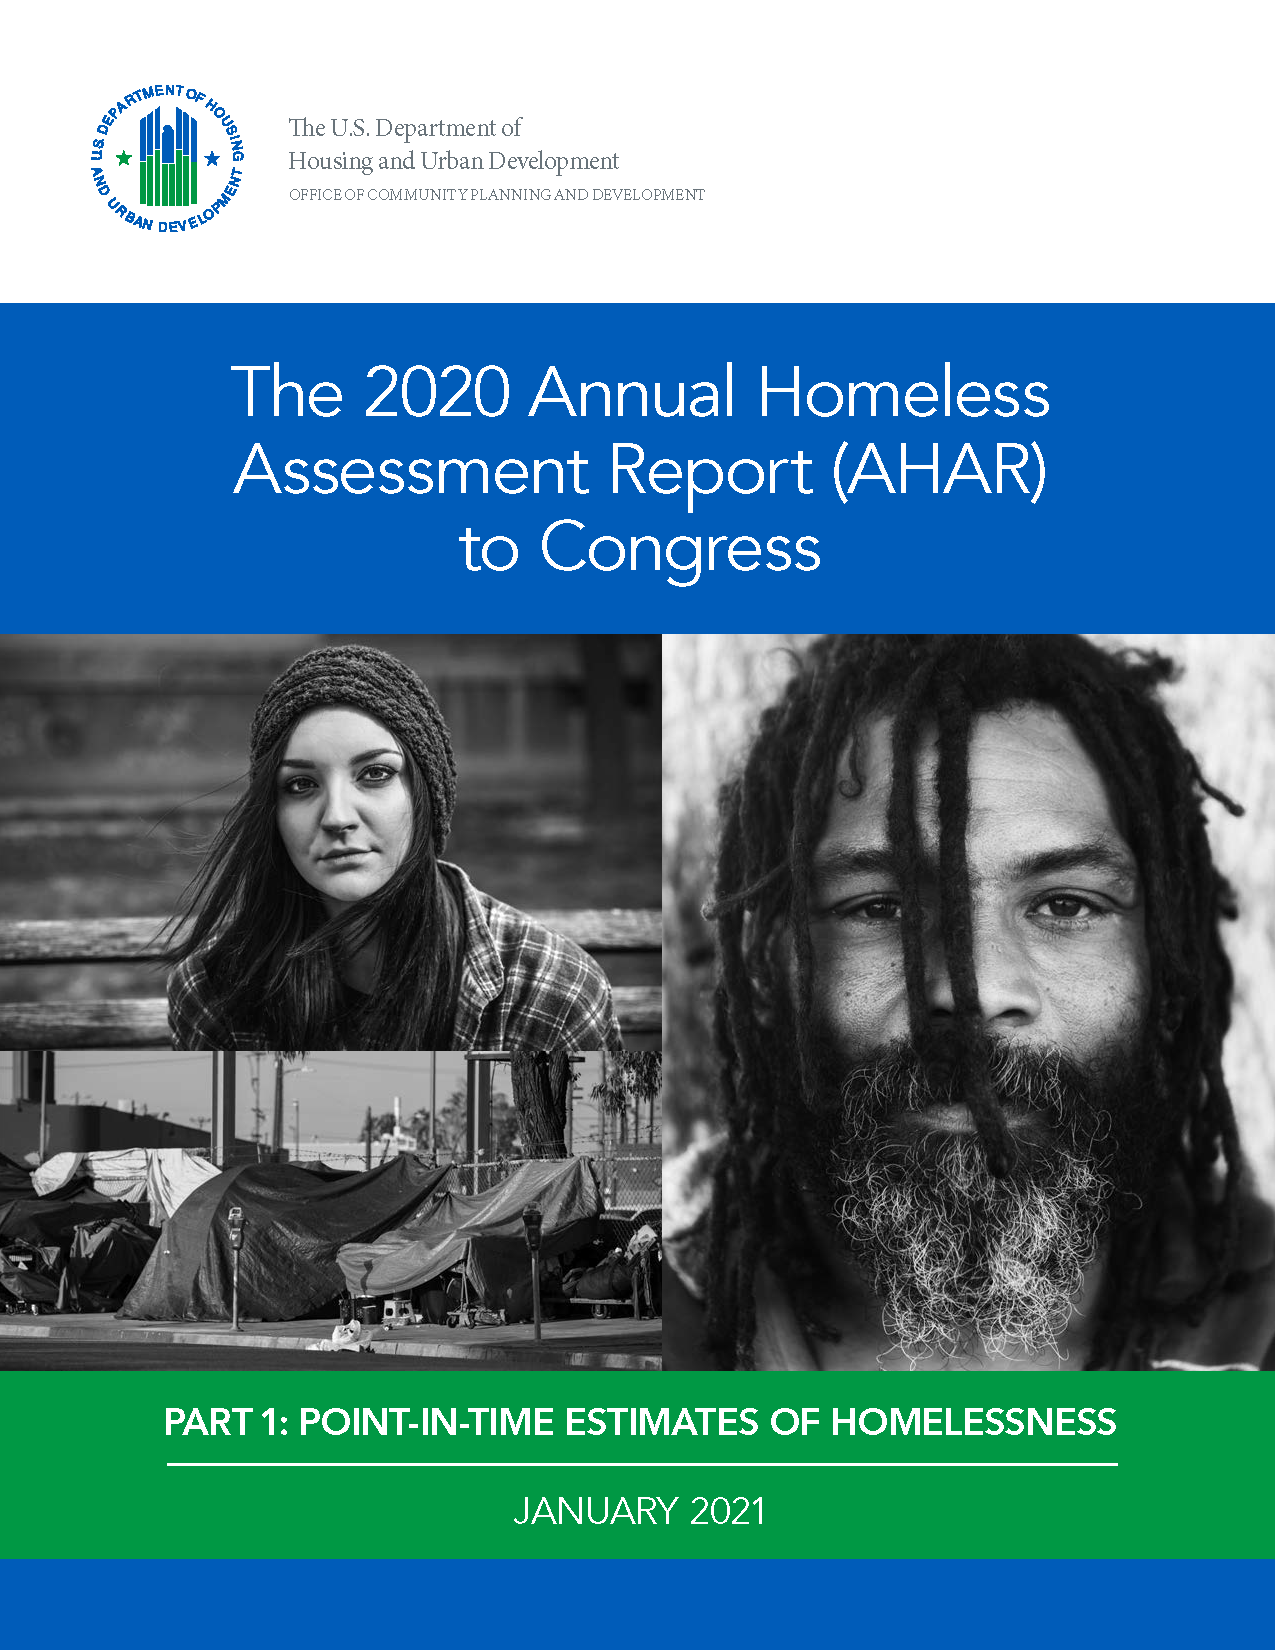 2020 Annual Homeless Assessment Report to Congress